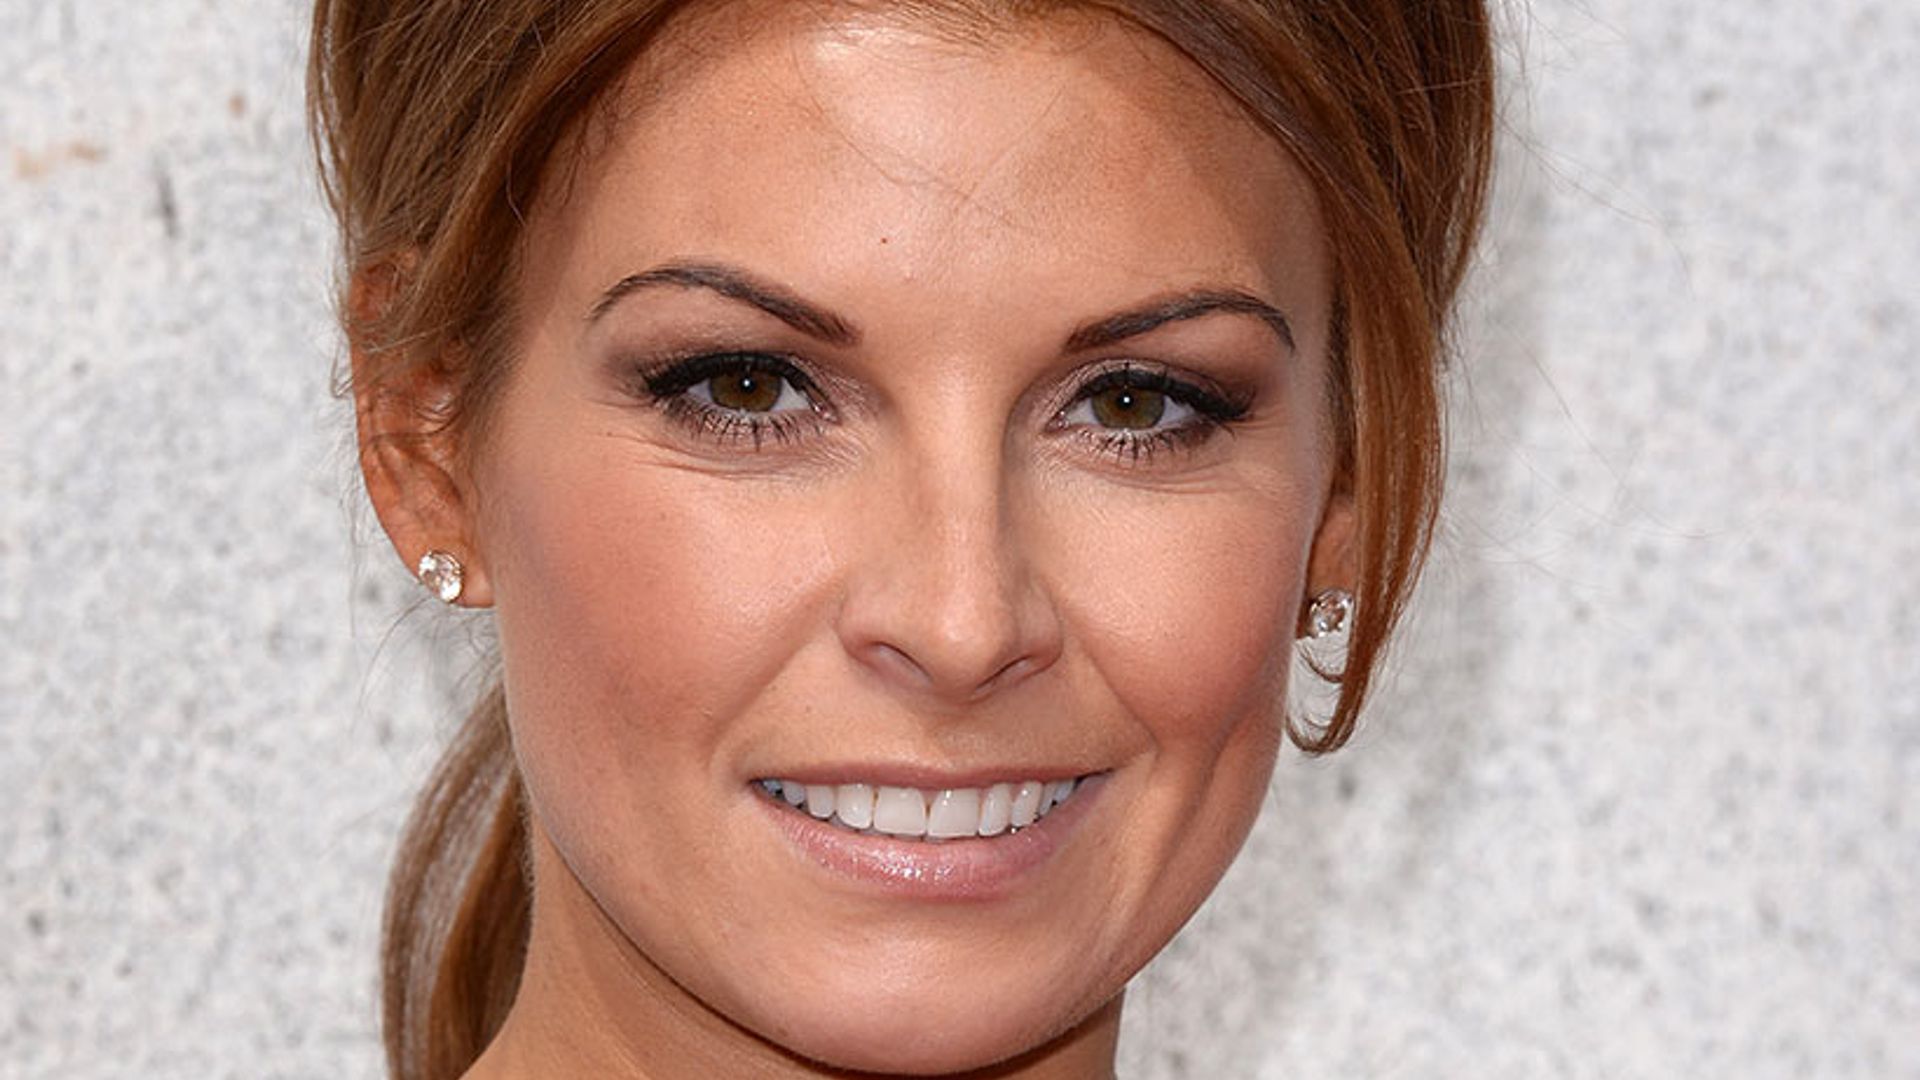 Coleen Rooney just wore the most fabulous Zara tweed top - and it cost her just £29